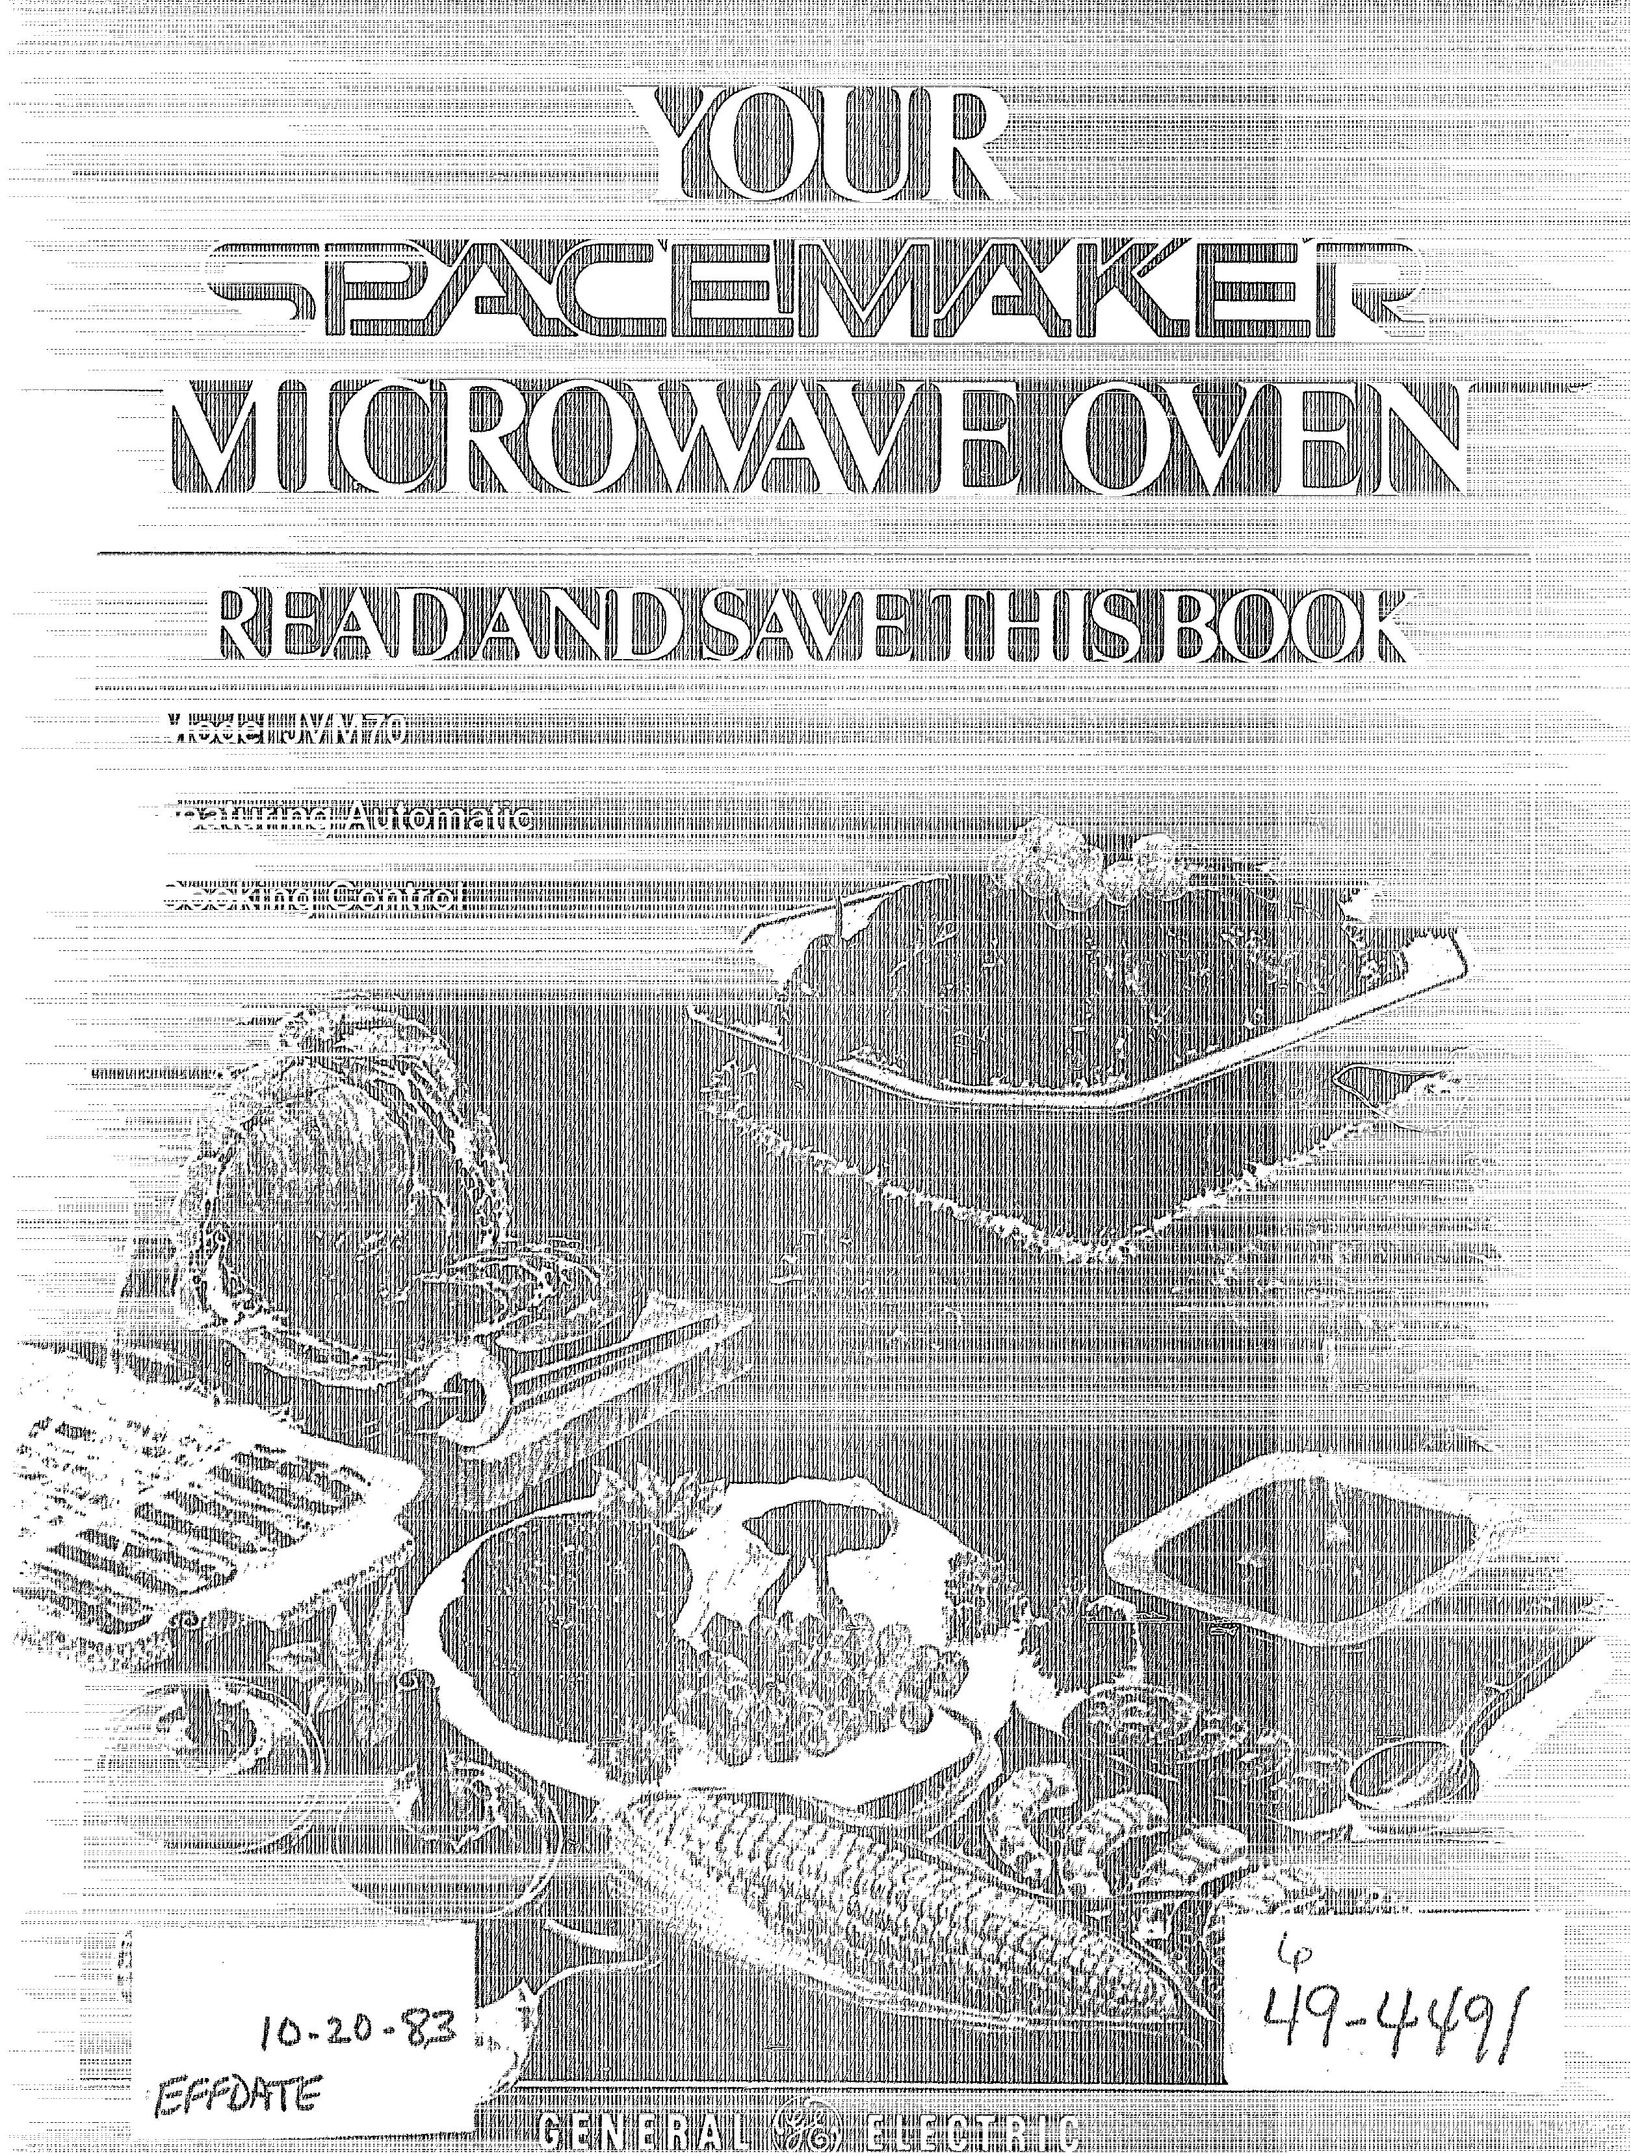 GE 862A725P23 Microwave Oven User Manual